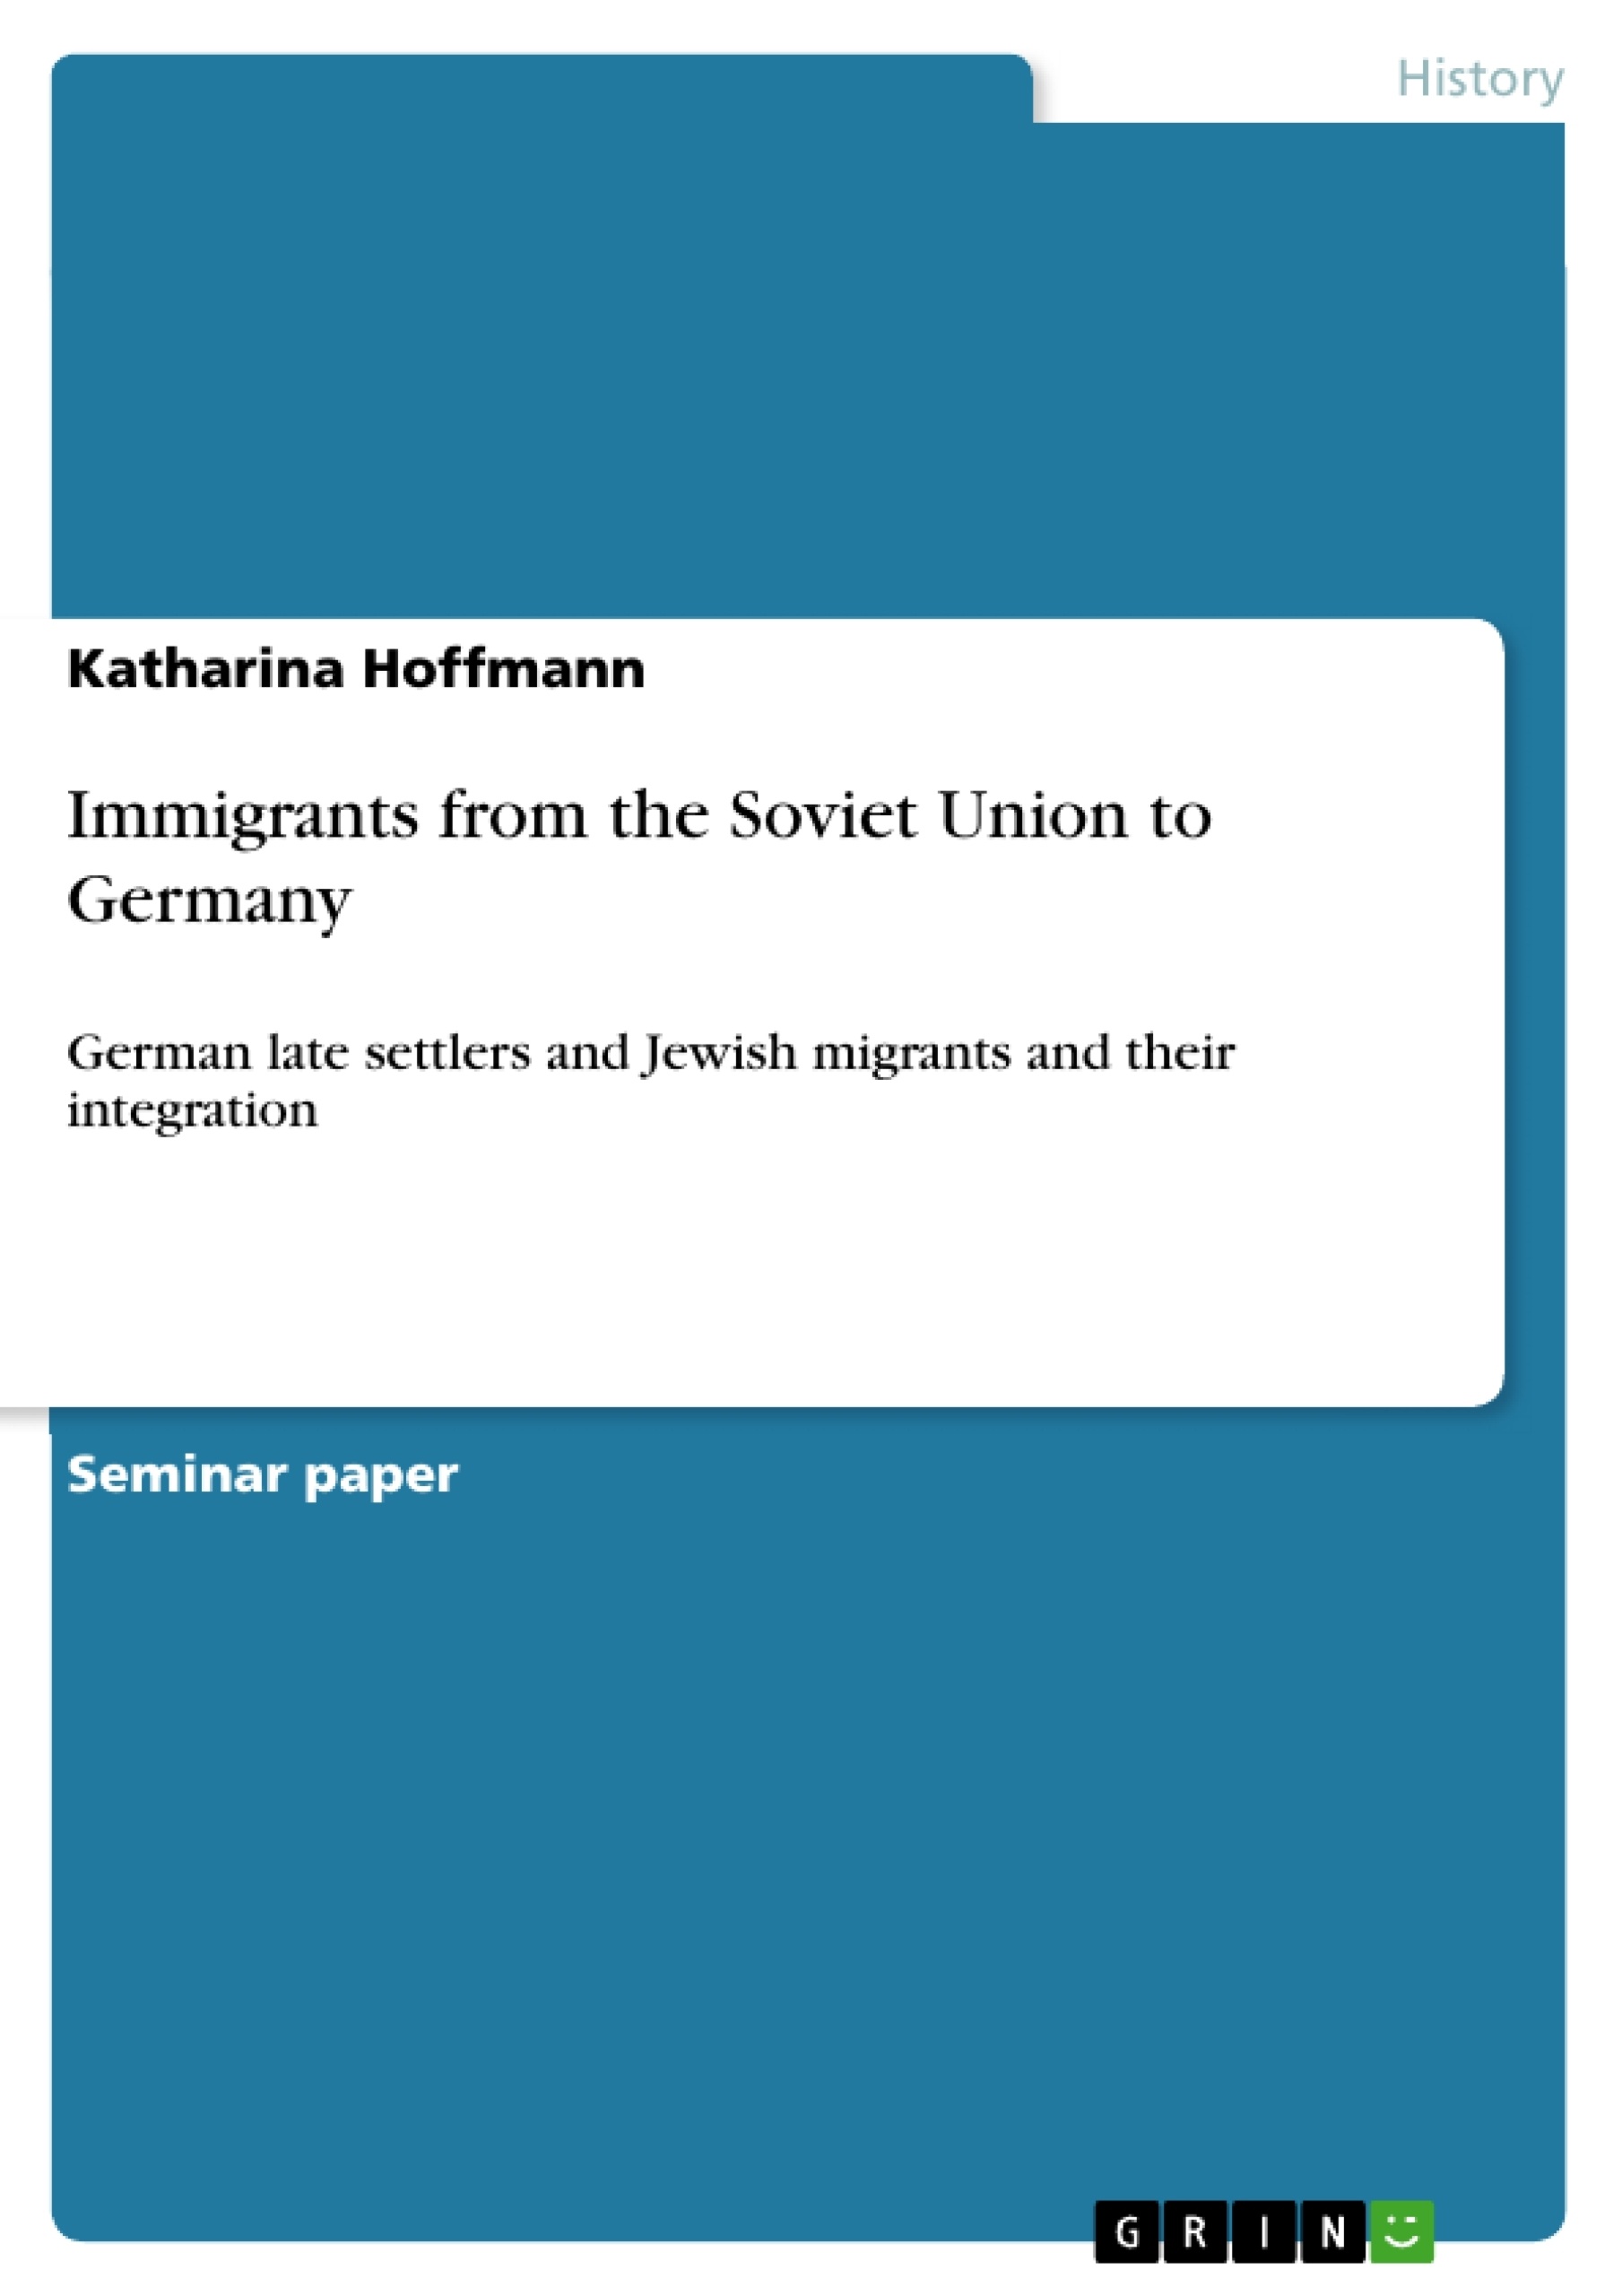 Title: Immigrants from the Soviet Union to Germany